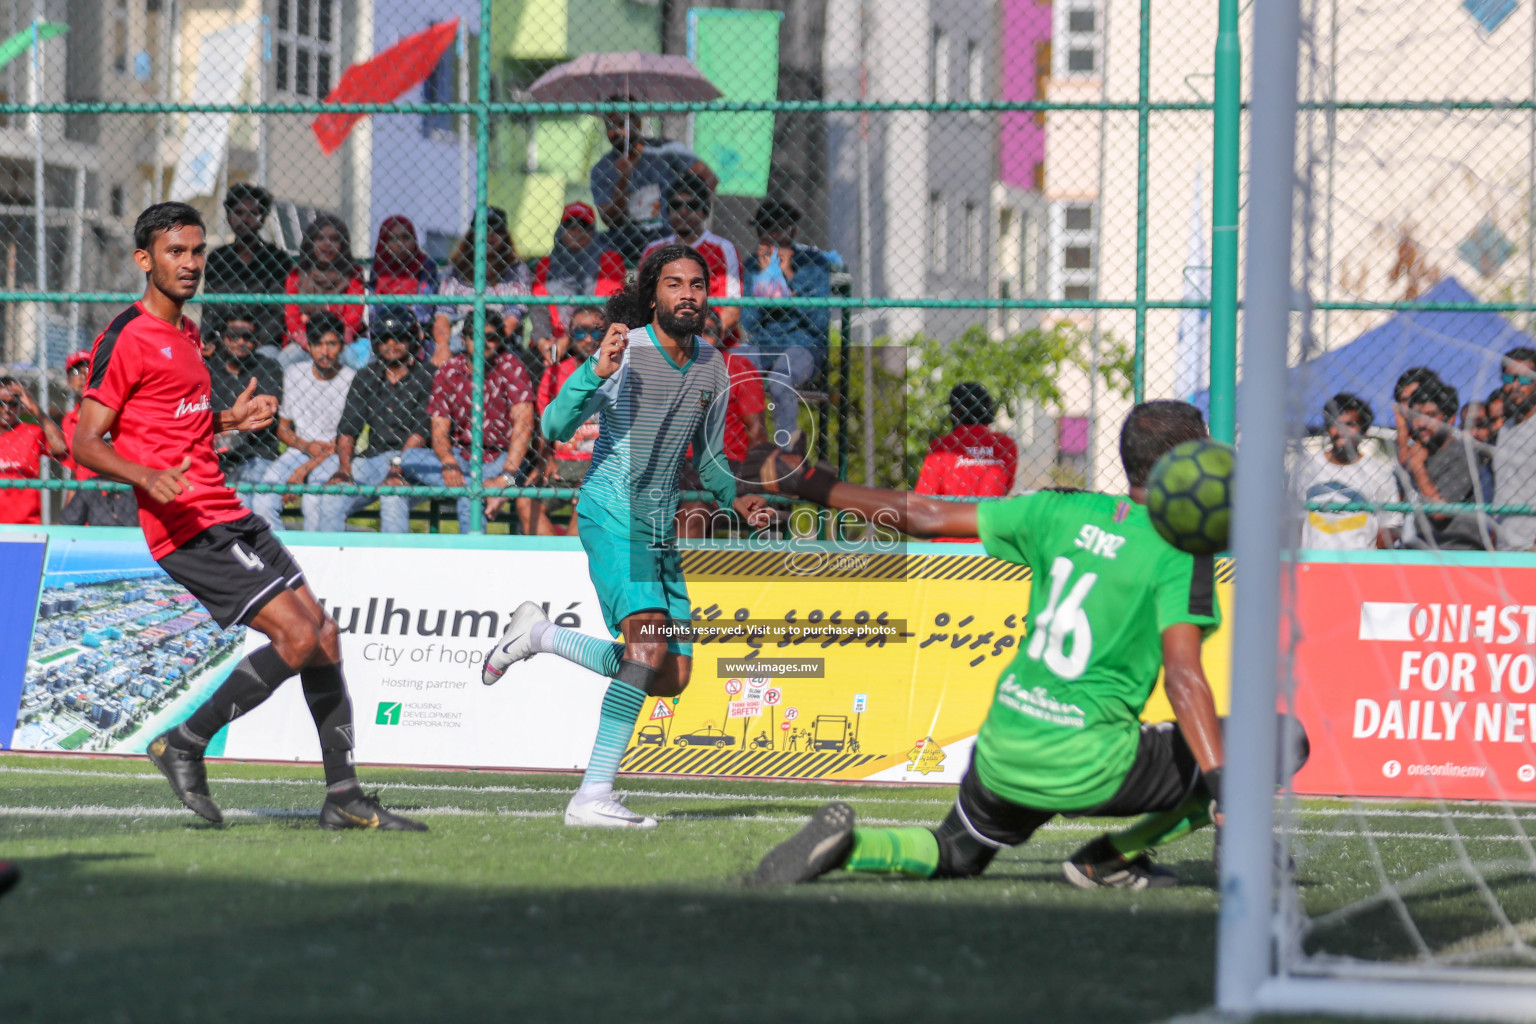 Club Maldives Day 4 in Hulhumale, Male', Maldives on 13th April 2019 Photos: Ismail Thoriq/images.mv